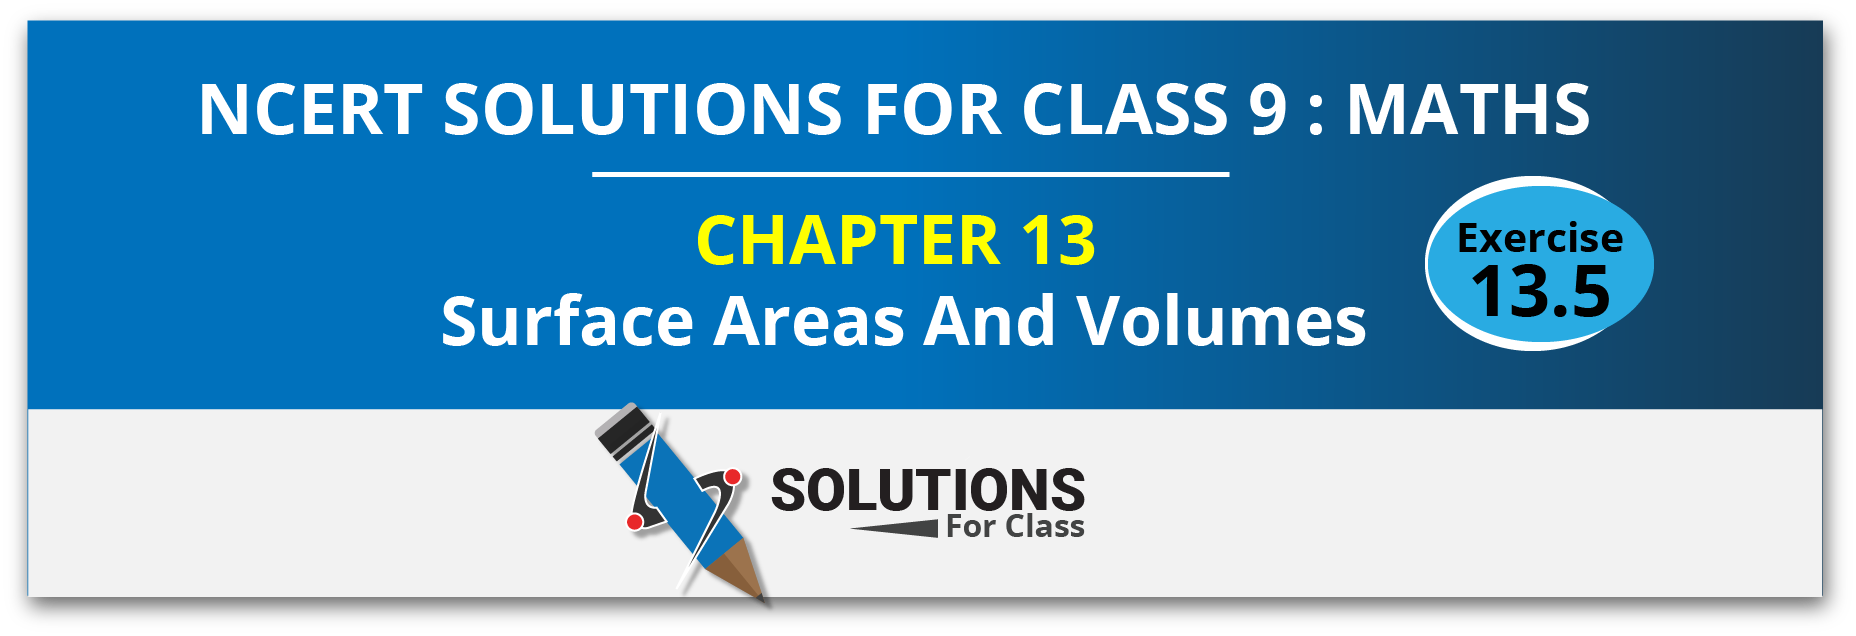 NCERT Solution For Class 9, Maths, Chapter 13, Surface Areas And Volumes, Exercise 13.5